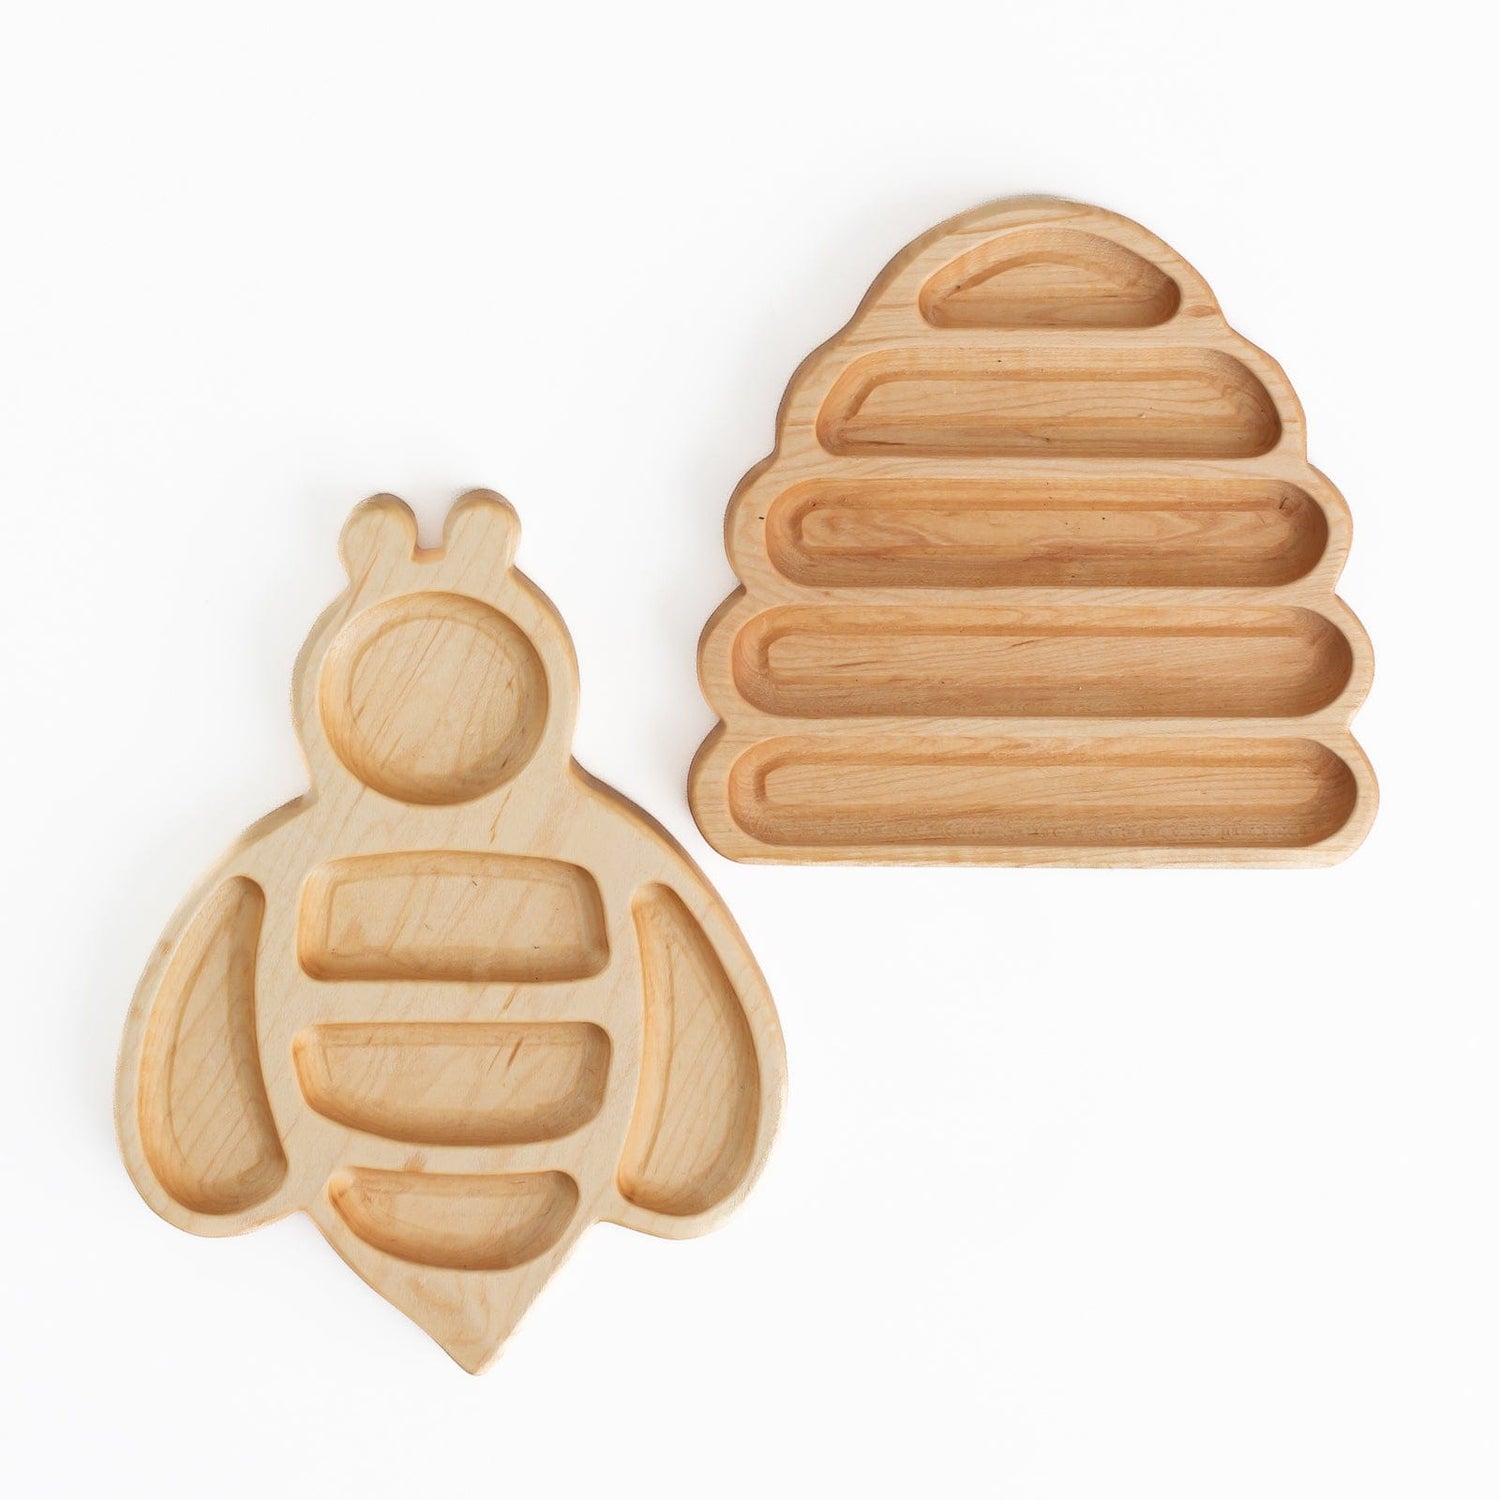 Aw & Co. Sensory Play Wooden Bumble Bee Plate / Sensory Tray (Made in Canada)